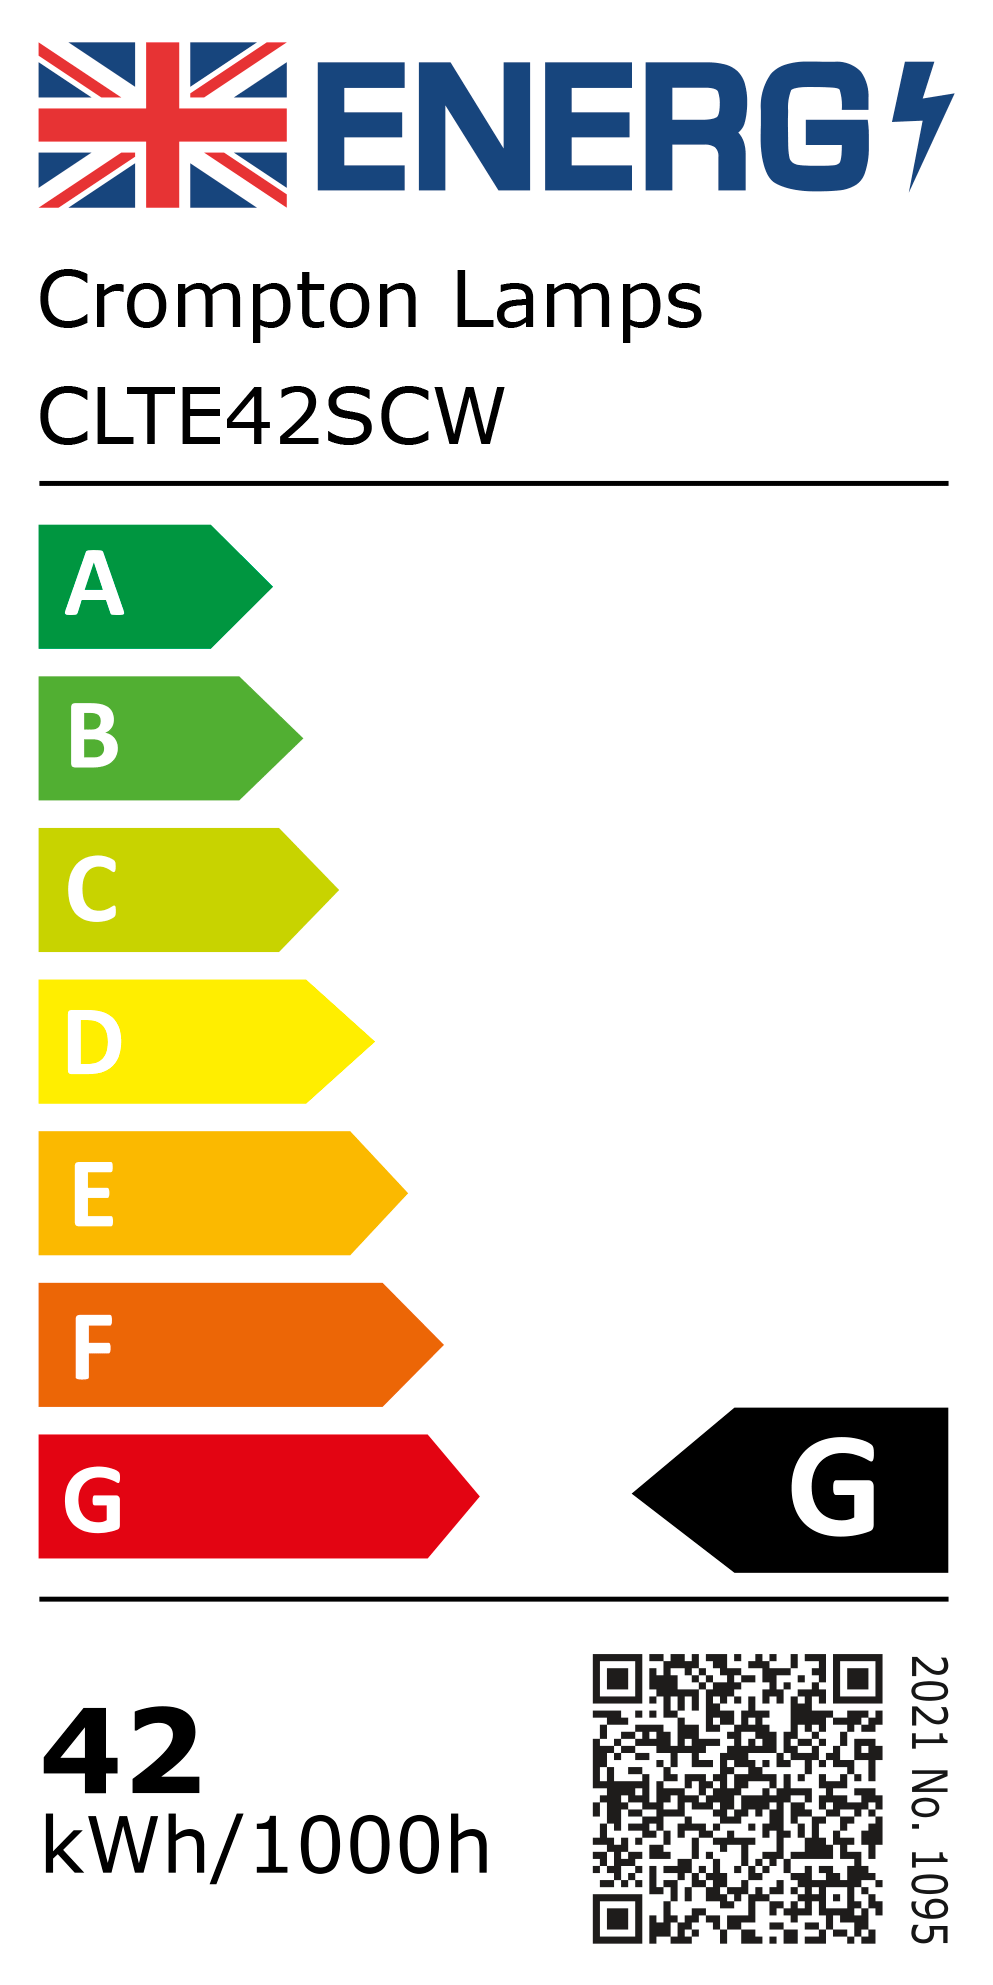 New 2021 Energy Rating Label: Stock Code CLTE42SCW